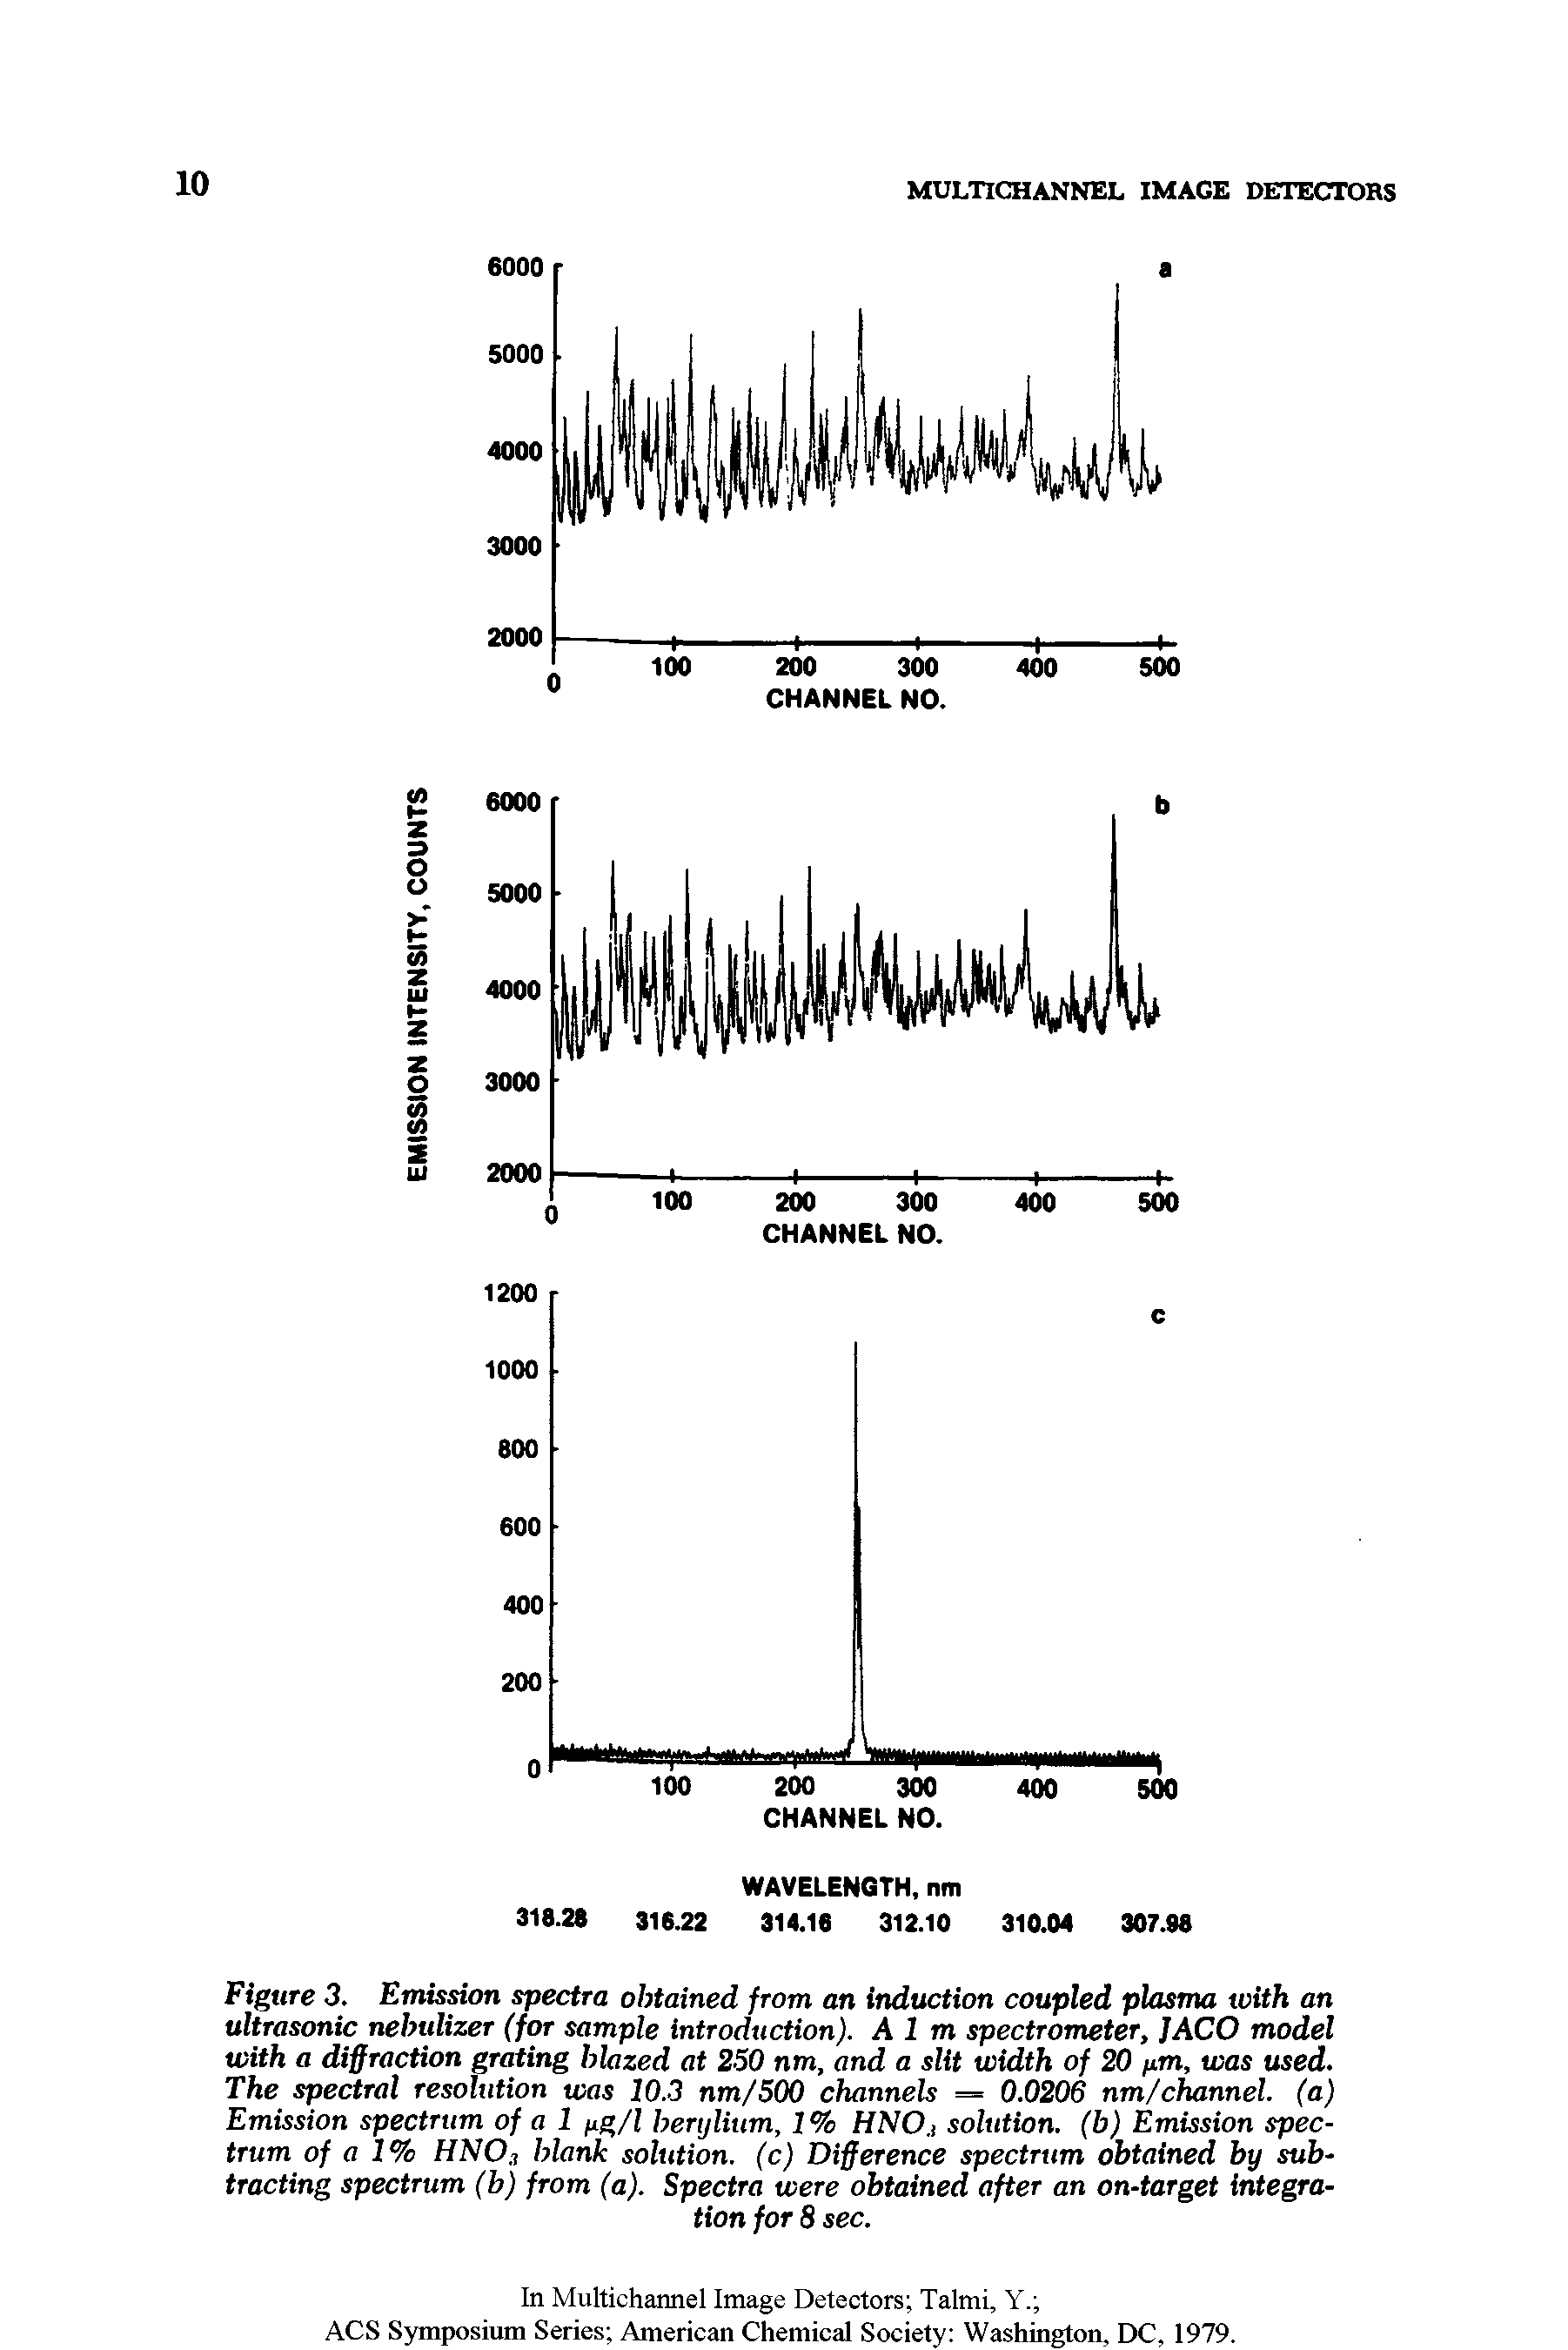 Figure 3. Emission spectra obtained from an induction coupled plasma with an ultrasonic nebulizer (for sample introduction). Aim spectrometer, JACO model with a diffraction grating blazed at 250 nm, and a slit width of 20 pm, was used. The spectral resolution was 10.3 nm/500 channels = 0.0206 nm/channel. (a) Emission spectrum of a 1 pg/l bertjlium, 1% HNOj solution, (b) Emission spectrum of a 1% HN03 blank solution, (c) Difference spectrum obtained by subtracting spectrum (b) from (a). Spectra were obtained after an on-target integration for 8 sec.